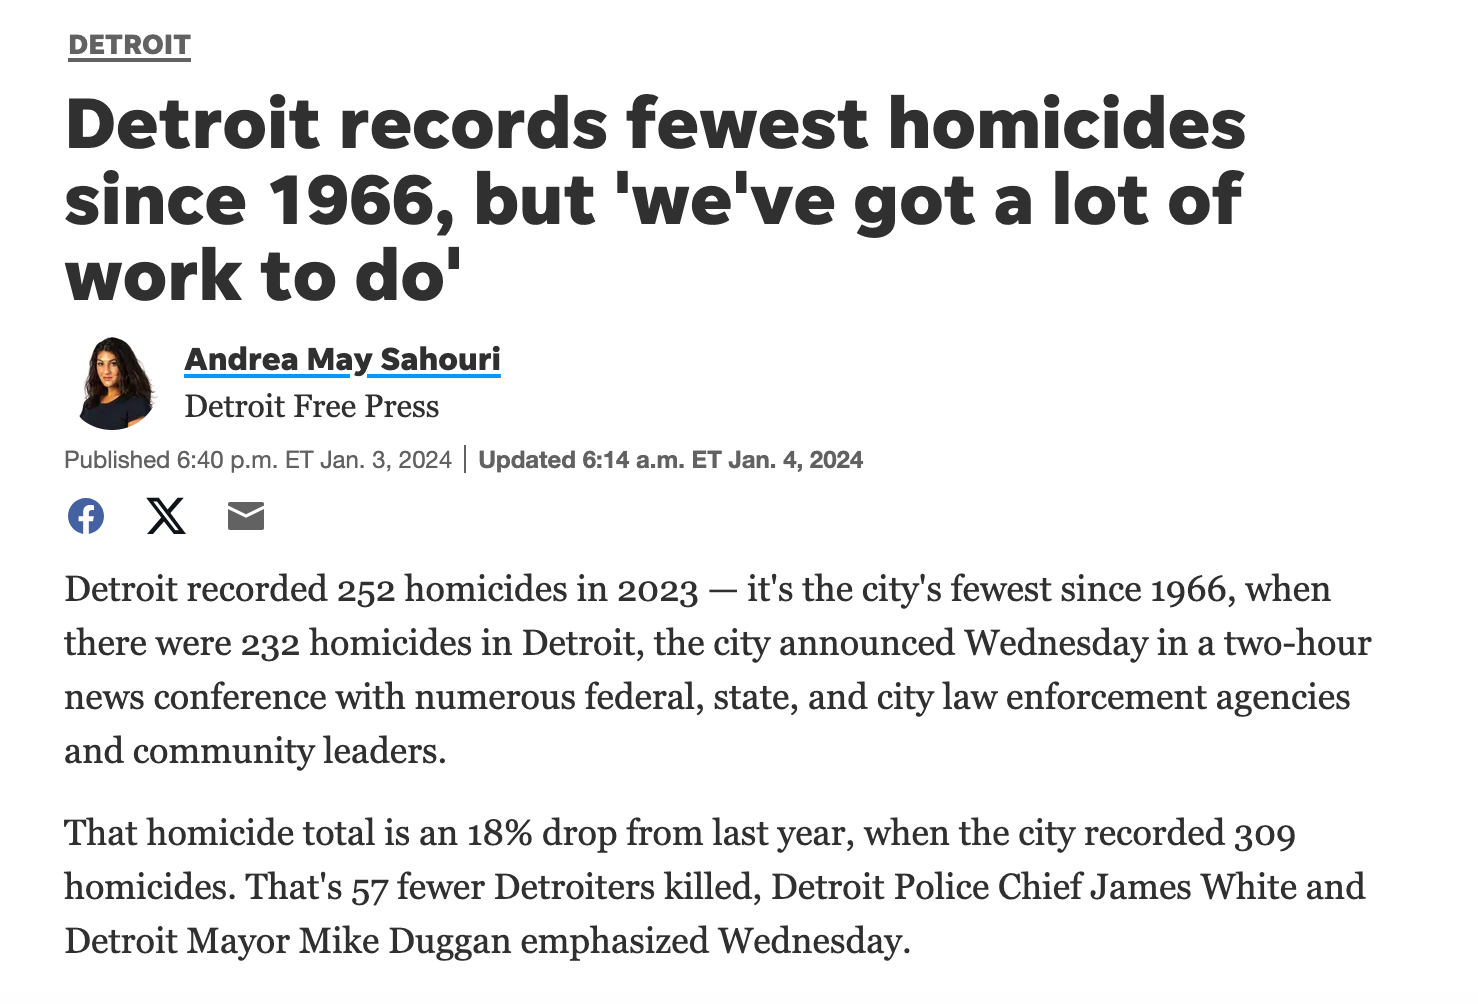 News article shows: In Detroit in 2023, homicides dropped 18% to the lowest level since 1966